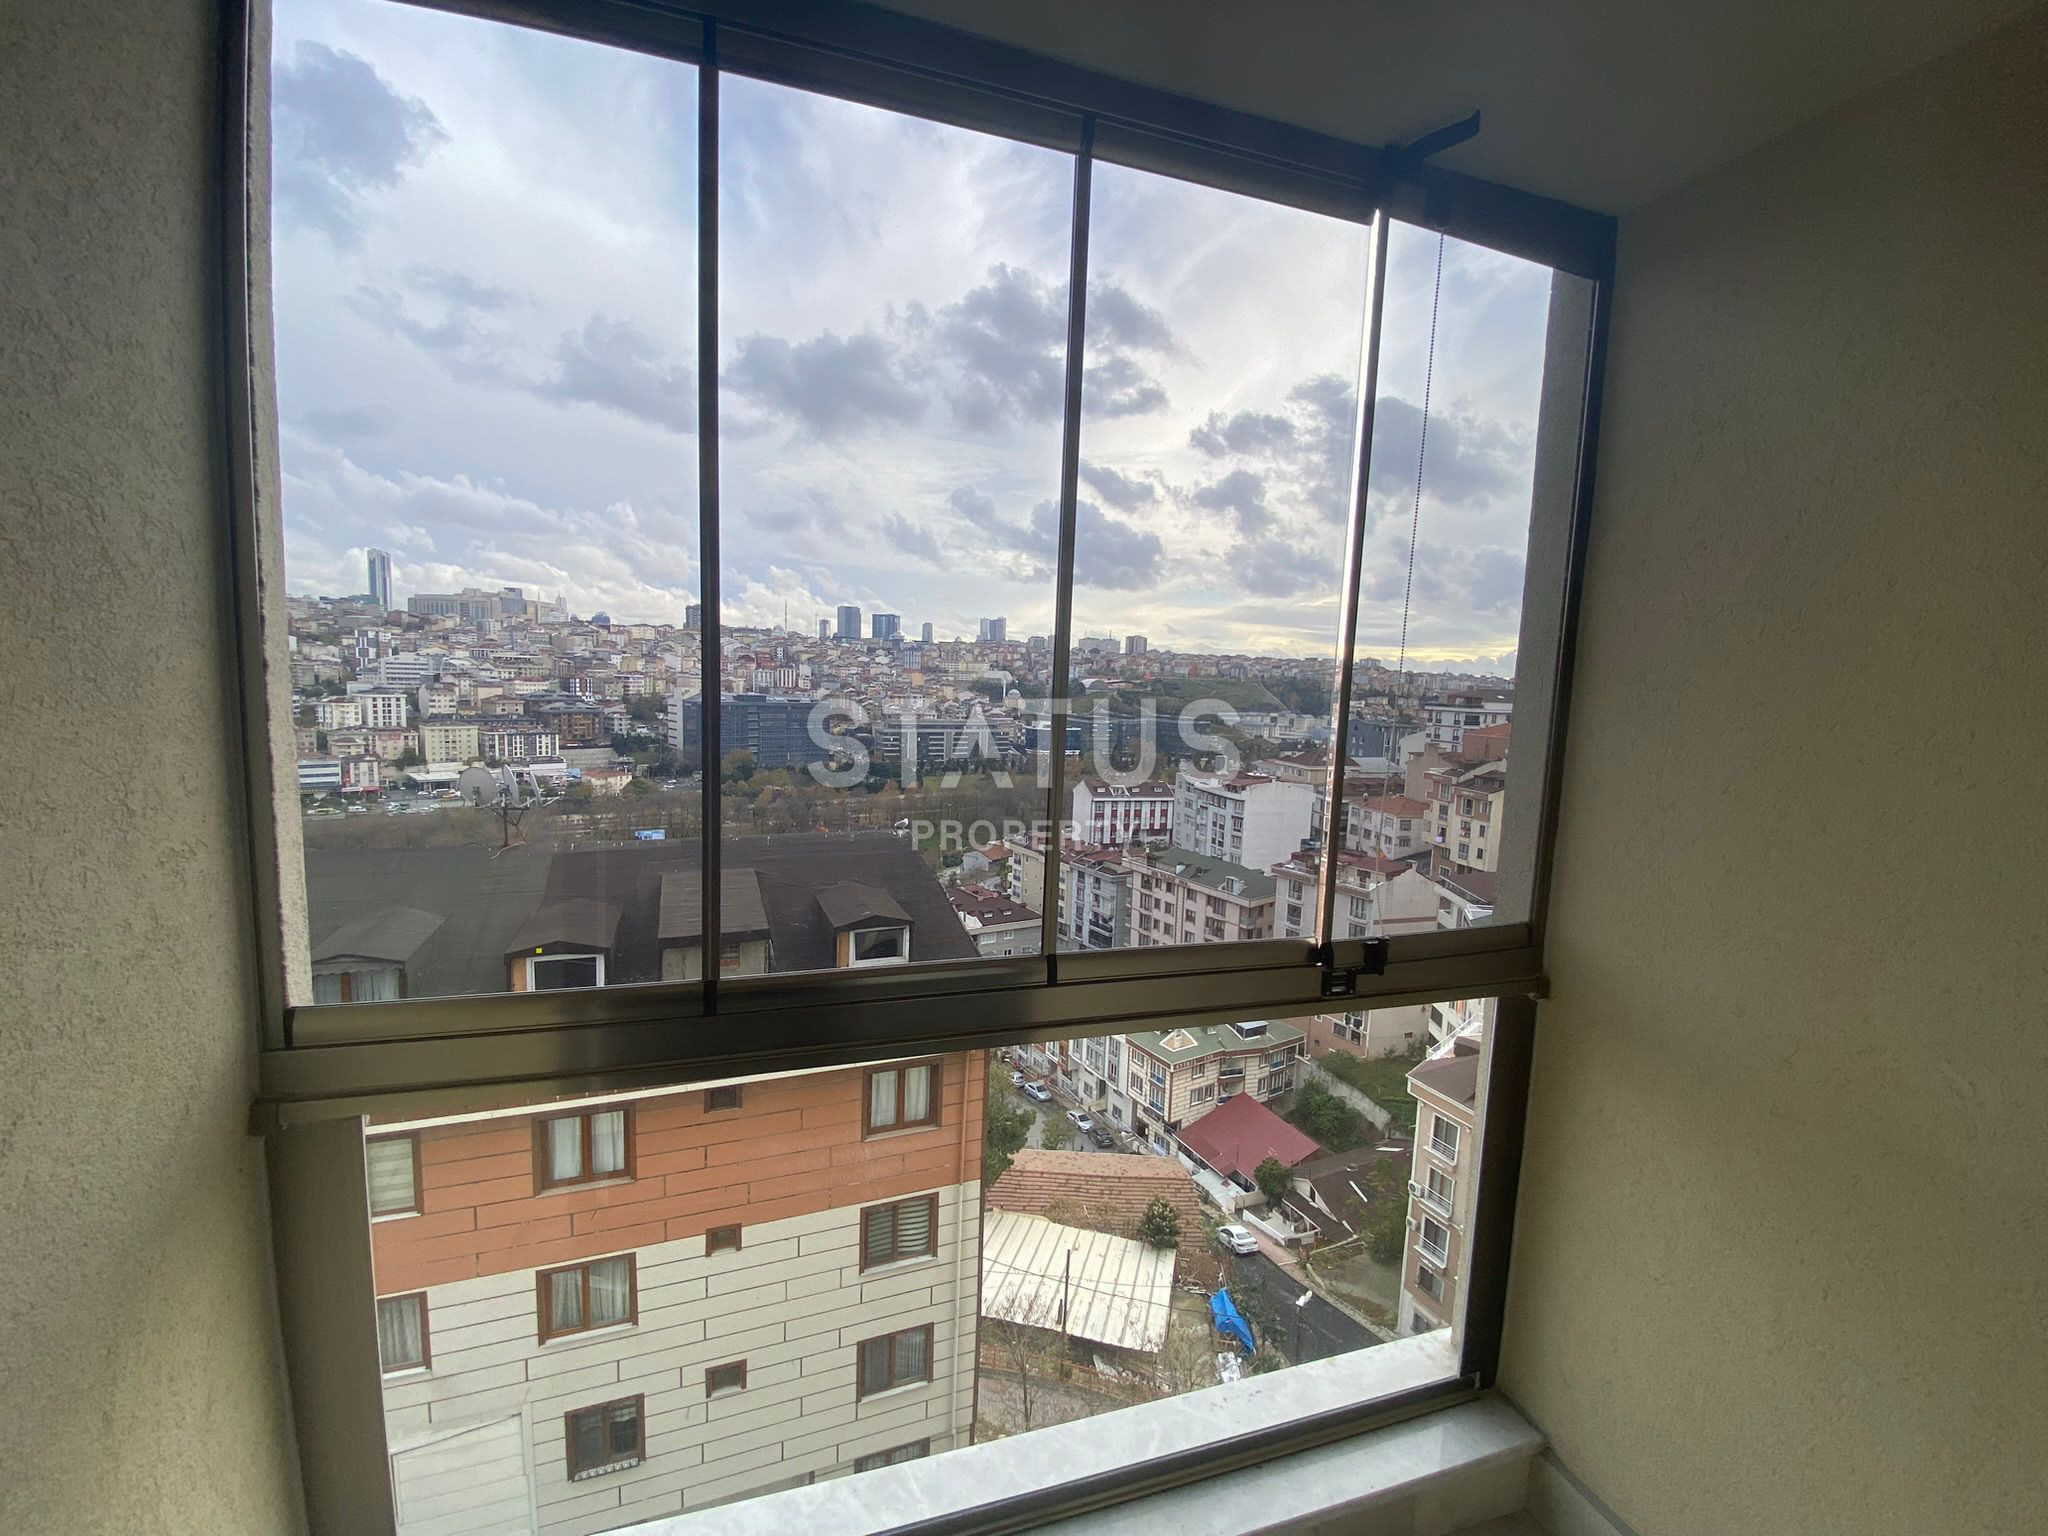 Spacious three-bedroom apartment in the sought-after Kagythane area of Istanbul. 150m2 фото 2